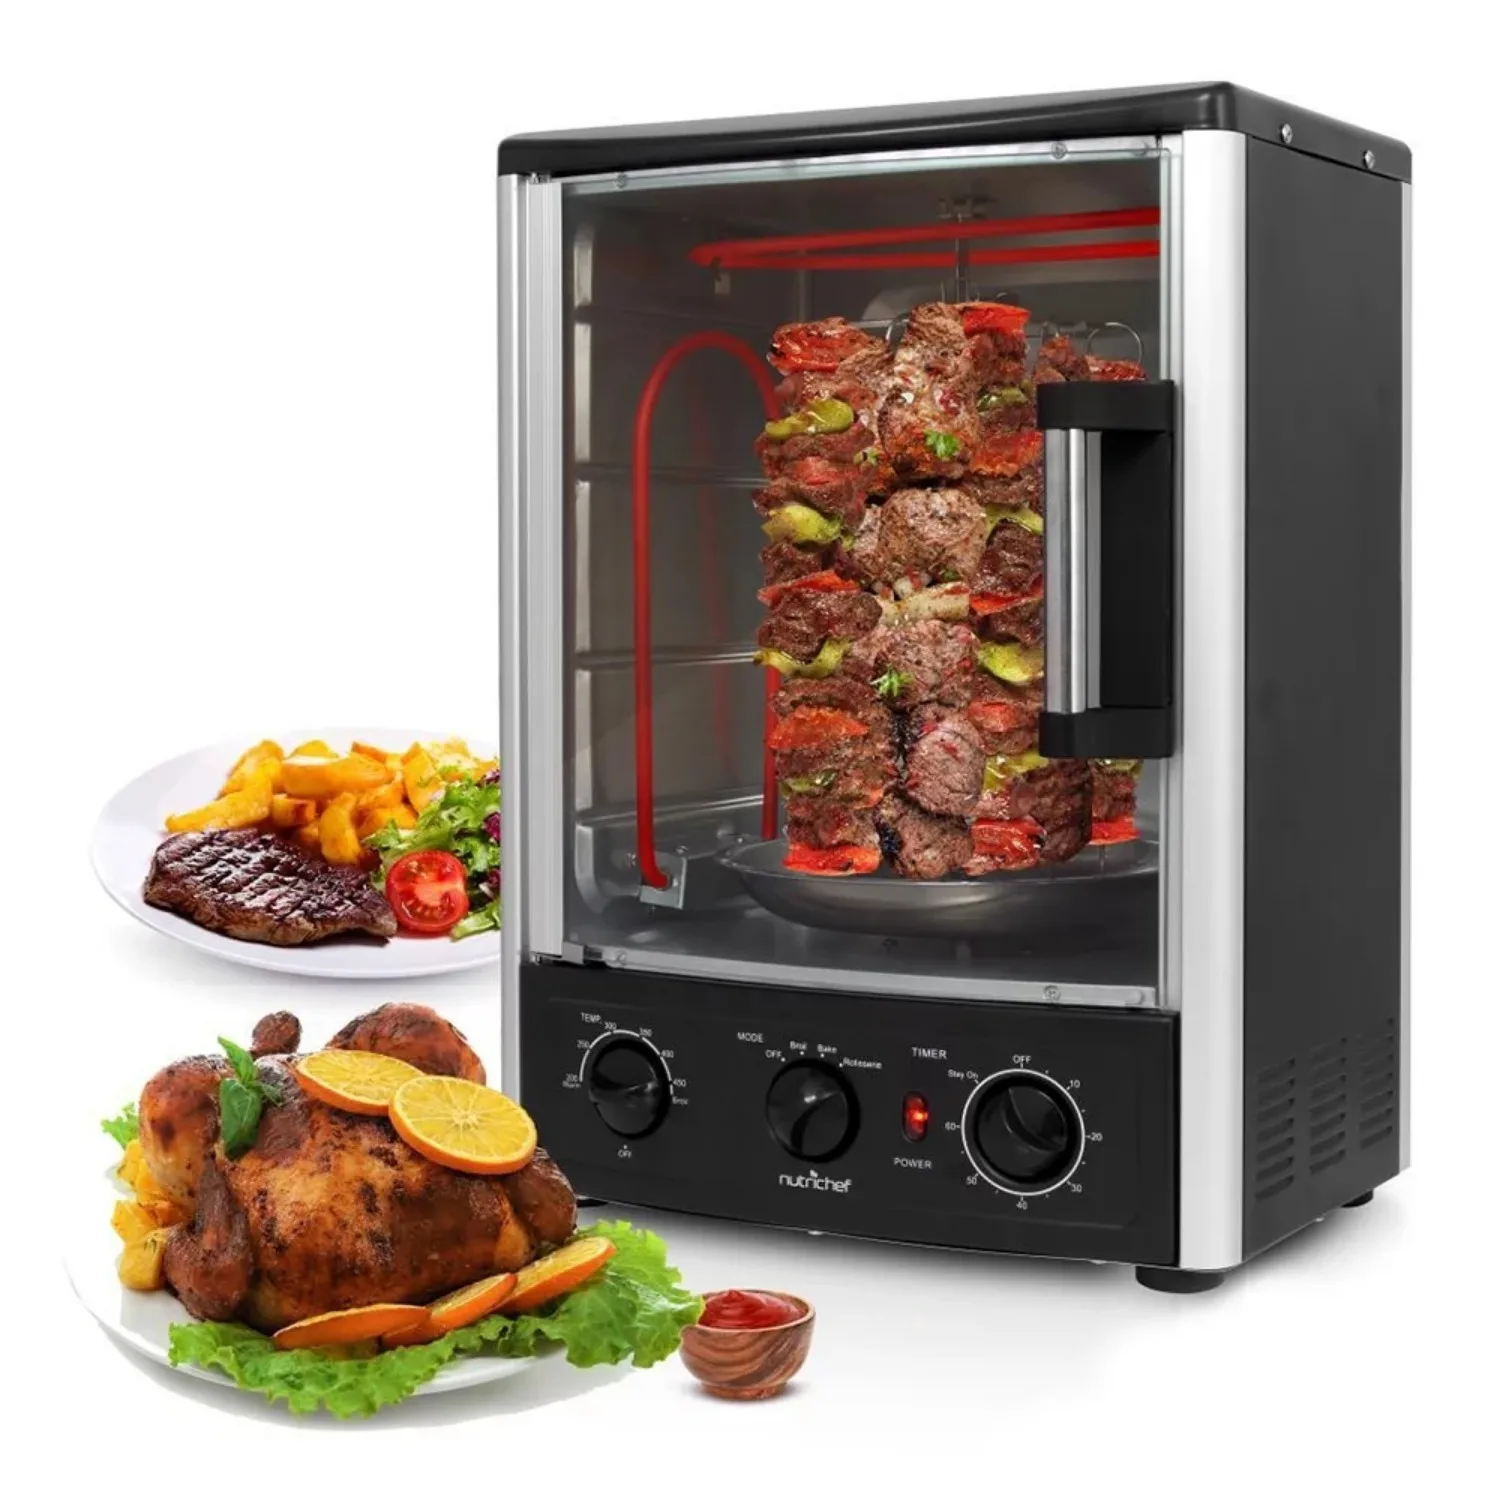 

Multi-function Vertical Oven With Bake Rotisserie & Roast Cooking doner kebab machine